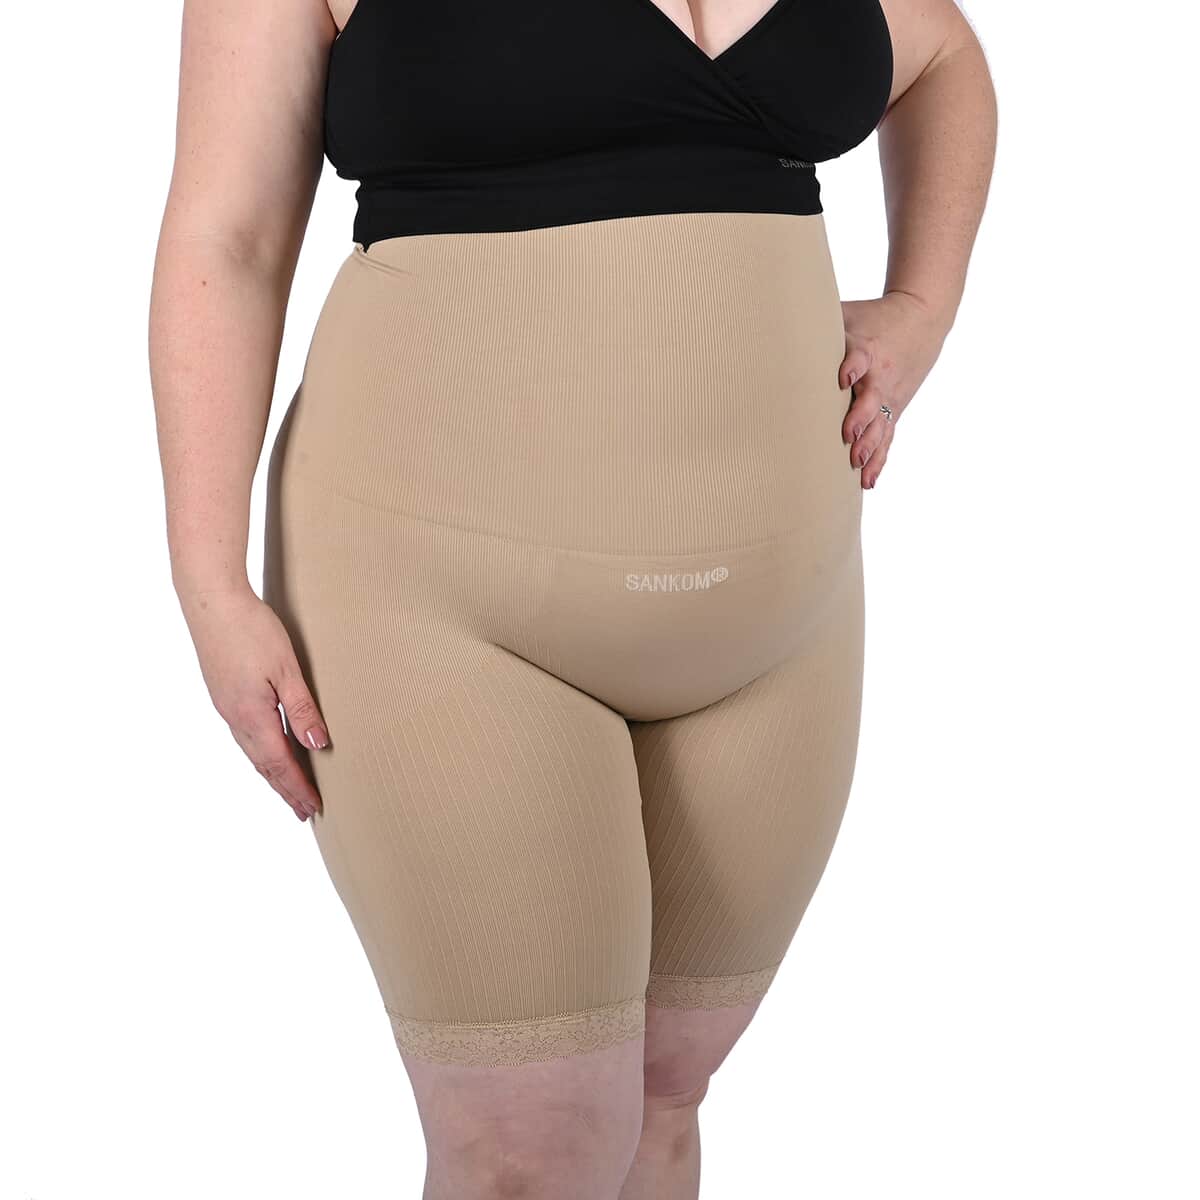 SANKOM Patent Classic Shapers with Lace - XXXL/Tan and White image number 0